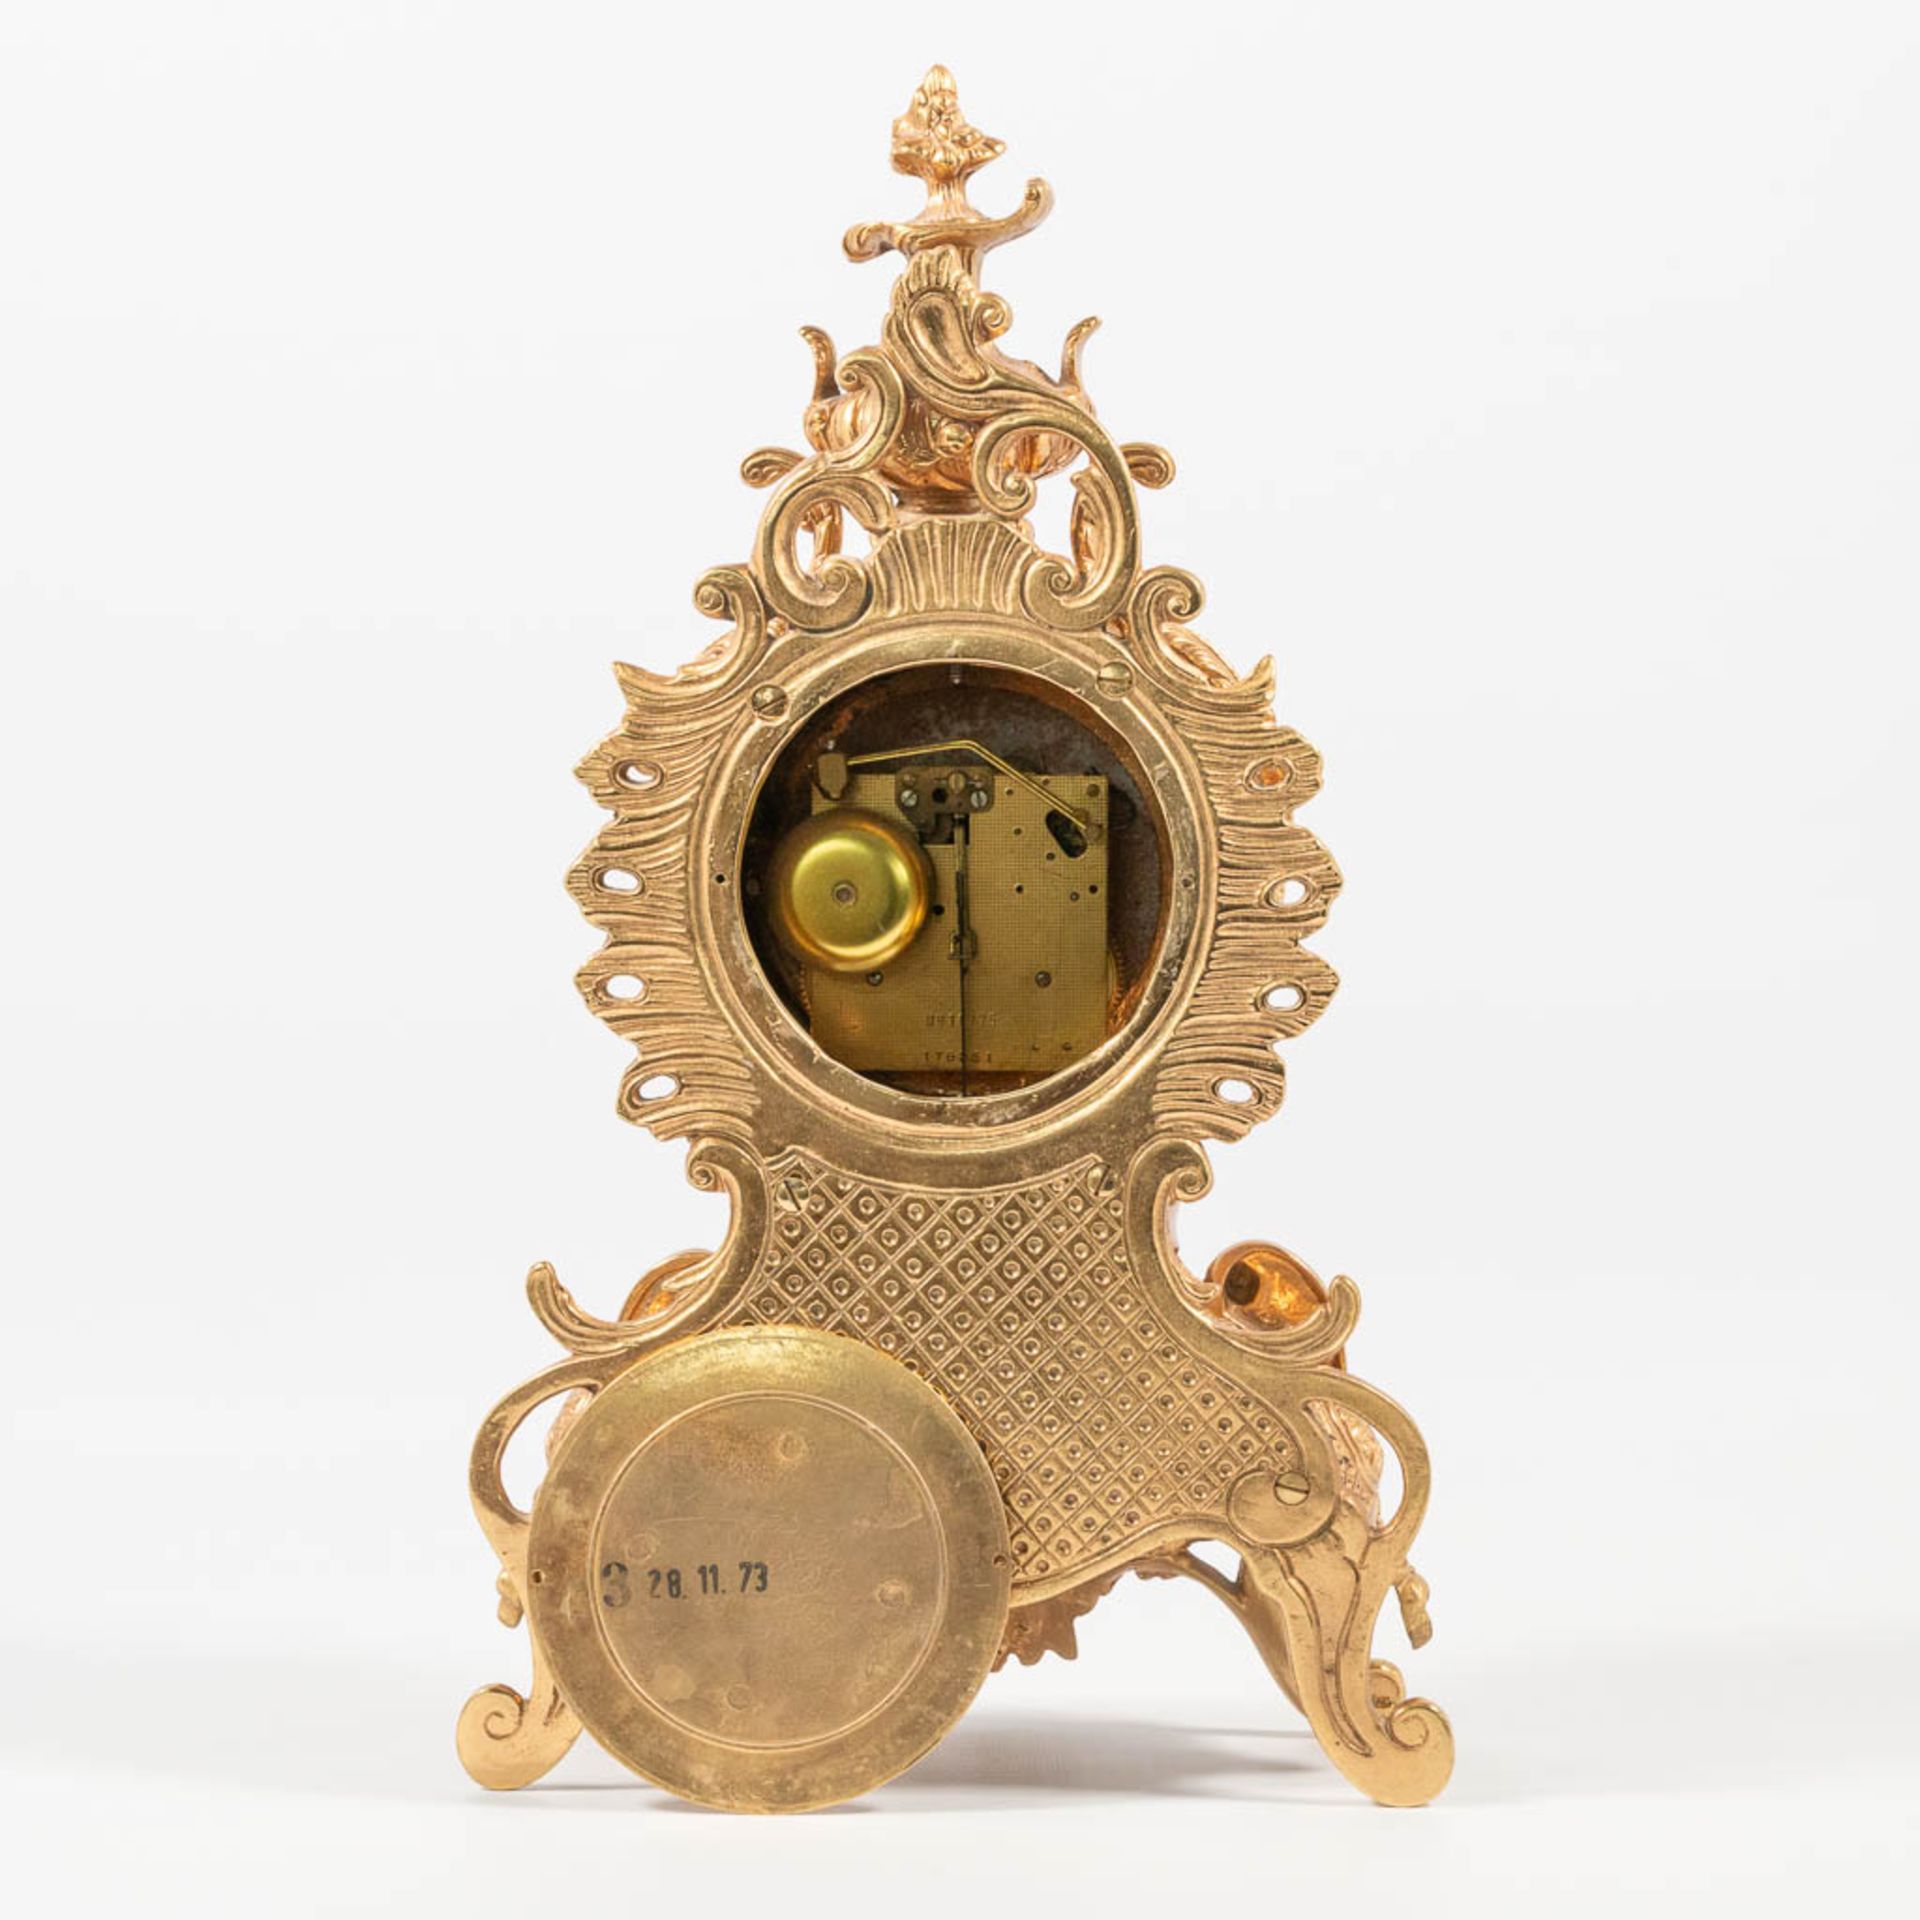 A vintage bronze clock 'Pevanda' with mechanical movement, made around 1970. - Image 7 of 19